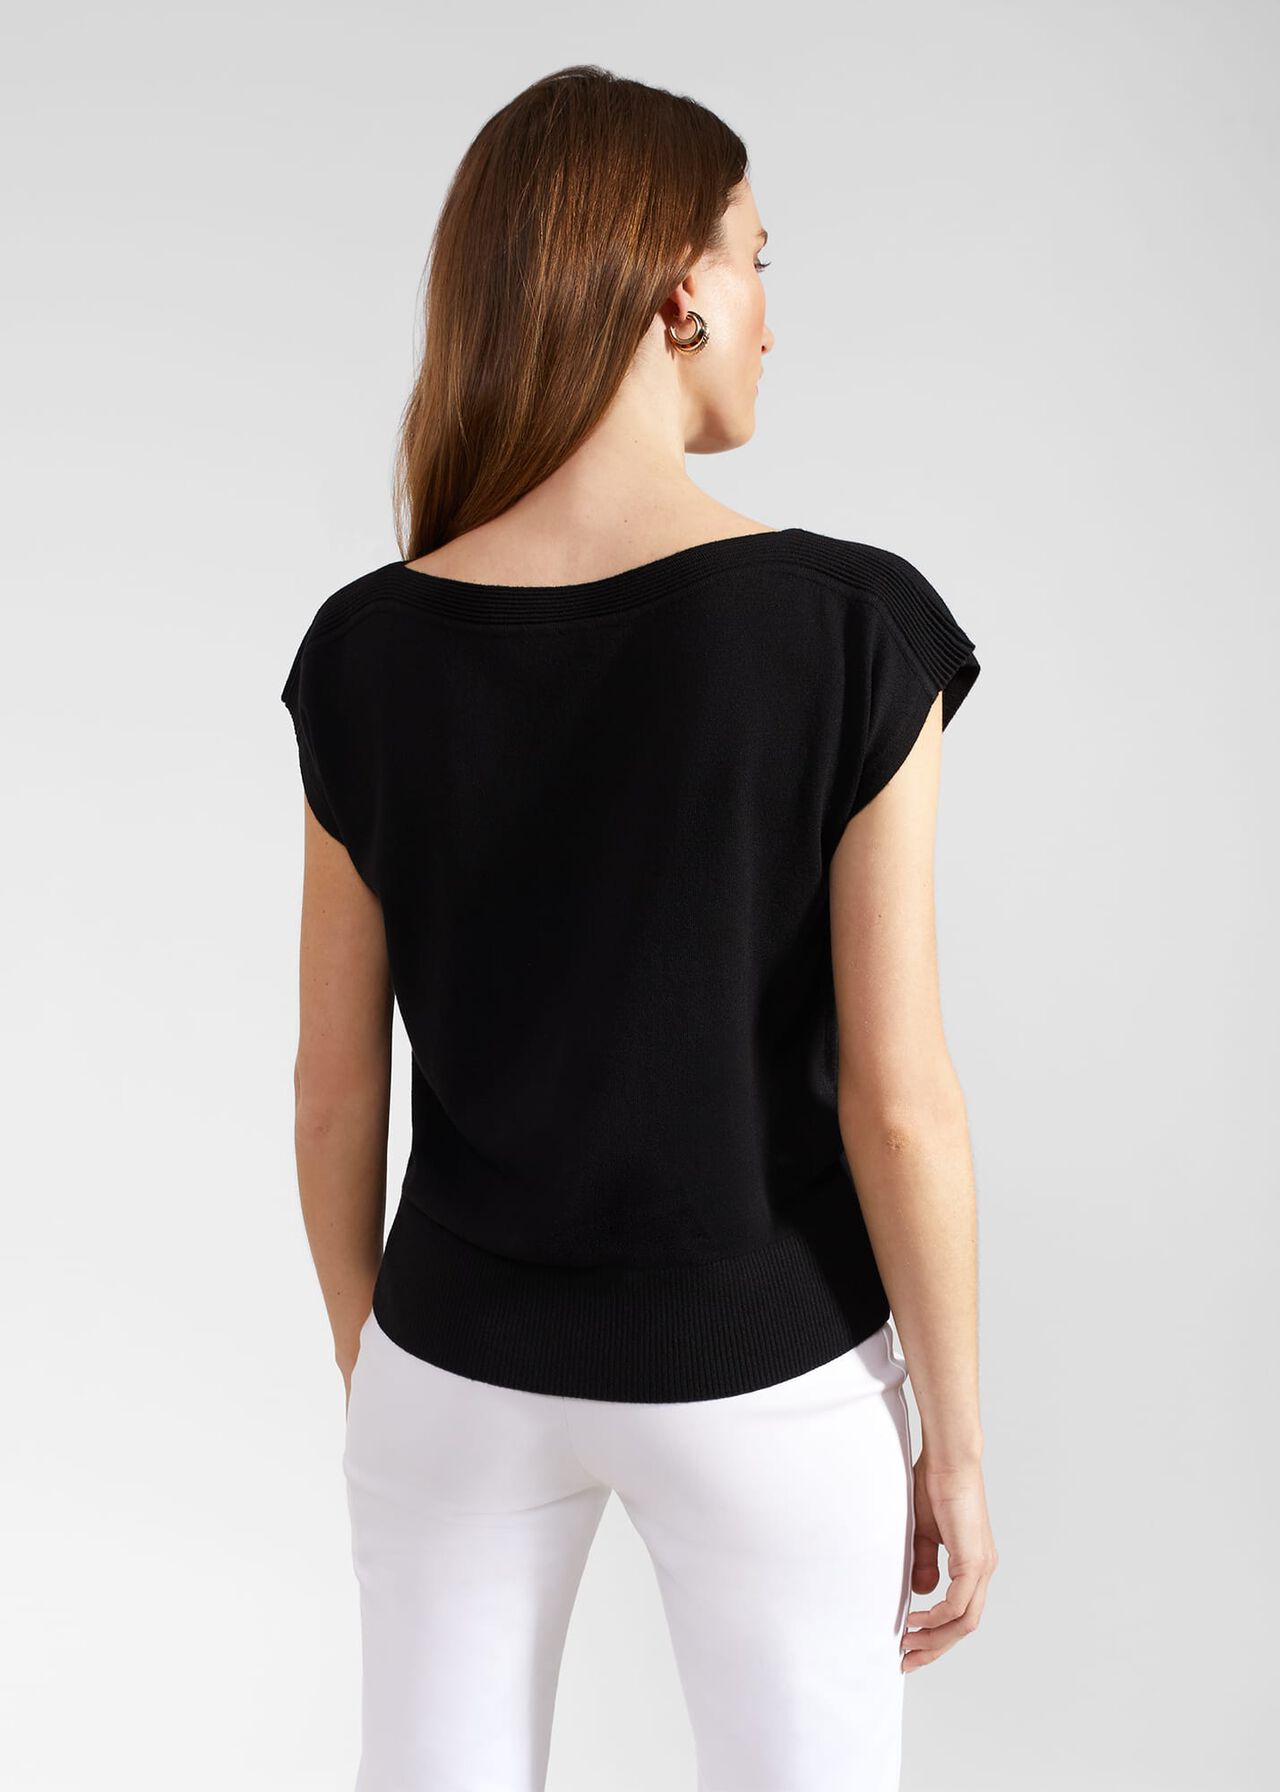 Leona Knitted Top With Wool, Black, hi-res